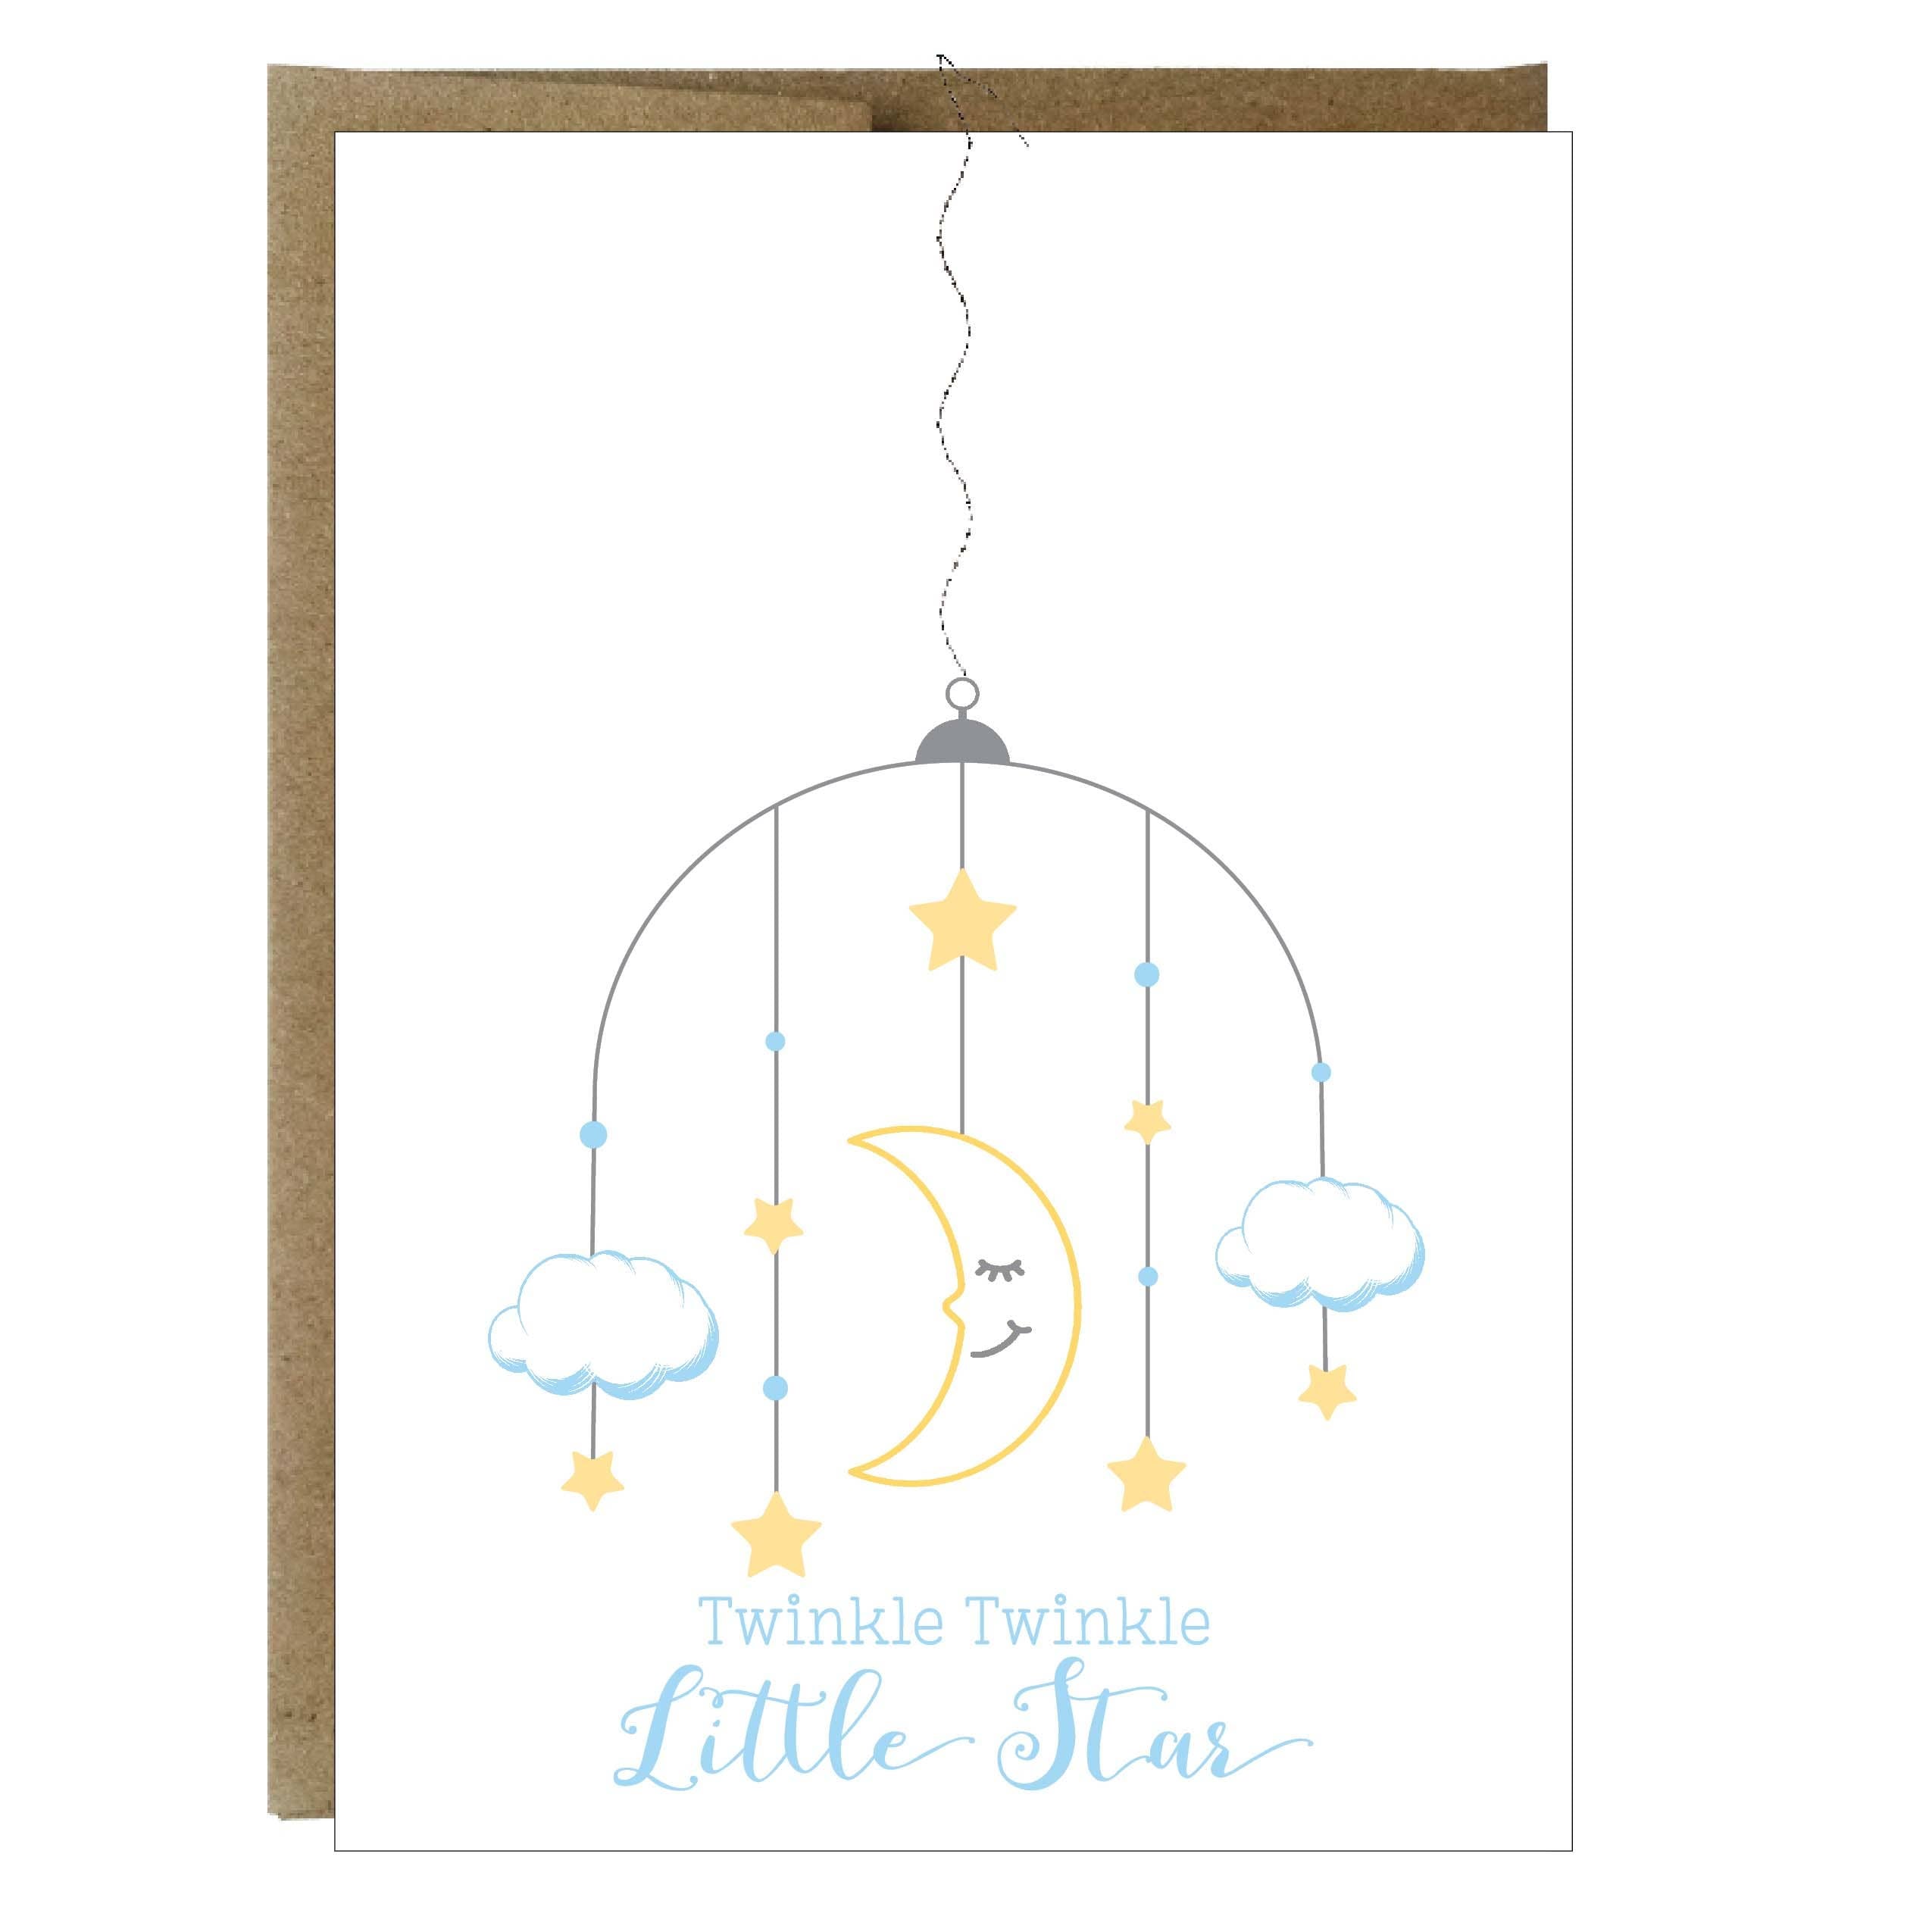 Twinkle Little Star Baby Greeting Card with Sewn Paper